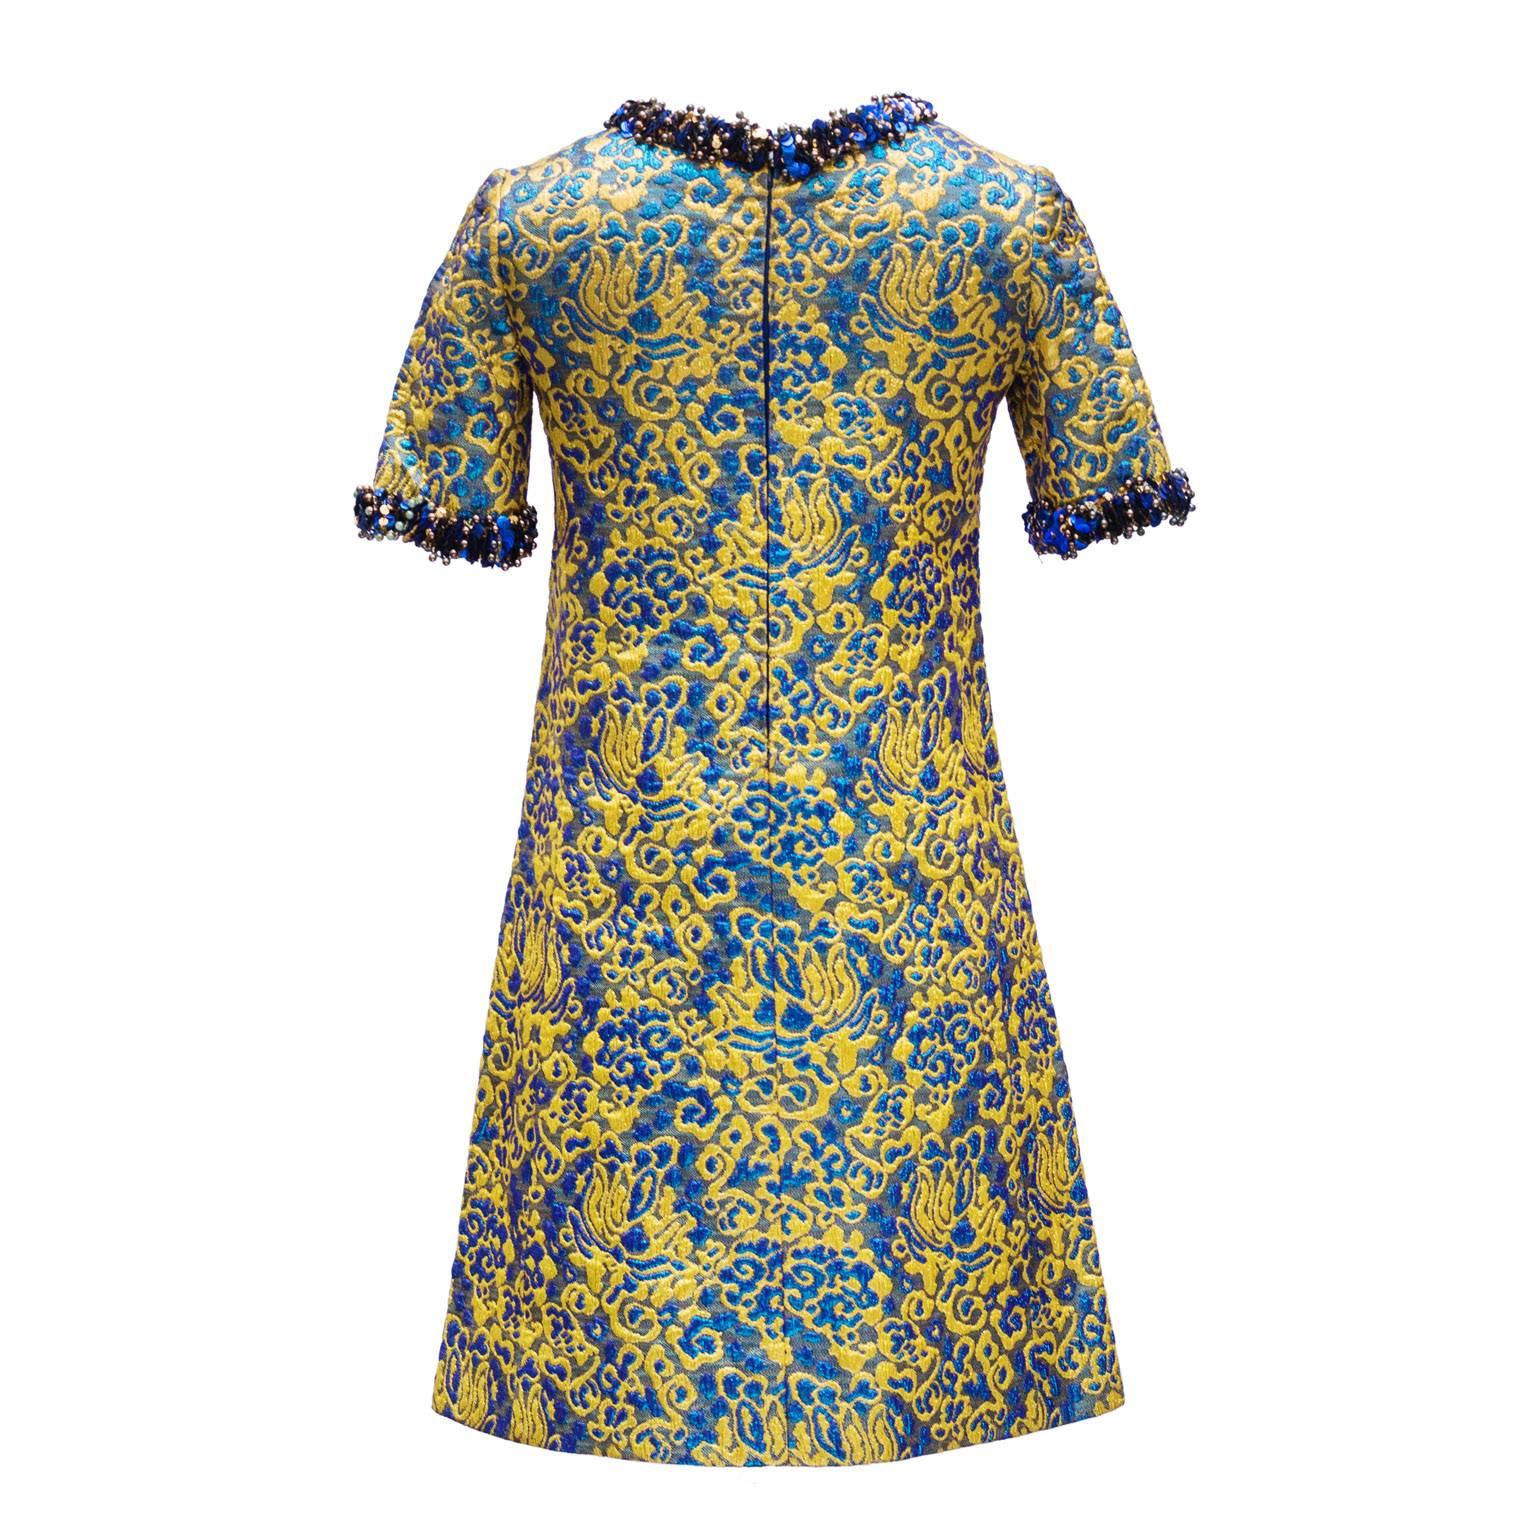 1966/67 Yves Saint Laurent Rive Gauche Divine Cocktail Dress

This is a divine short trapeze cocktail dress ; broché gold and blu .

Short sleeves and neck embroidered with gold and blue pearls and sequins 

few sequins missing but invisible when